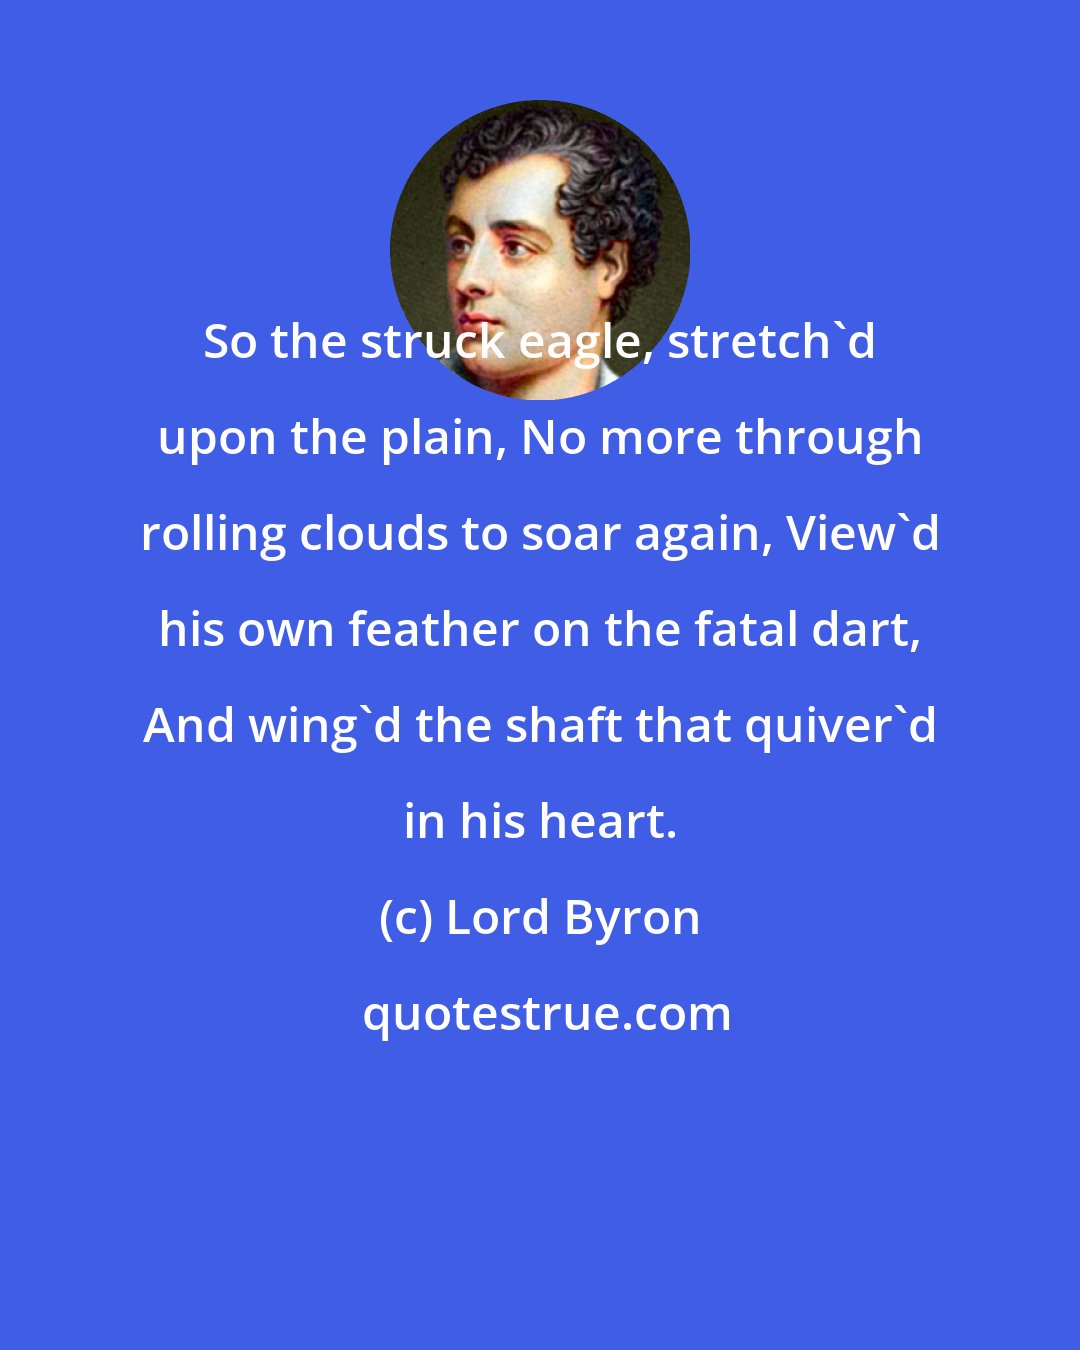 Lord Byron: So the struck eagle, stretch'd upon the plain, No more through rolling clouds to soar again, View'd his own feather on the fatal dart, And wing'd the shaft that quiver'd in his heart.